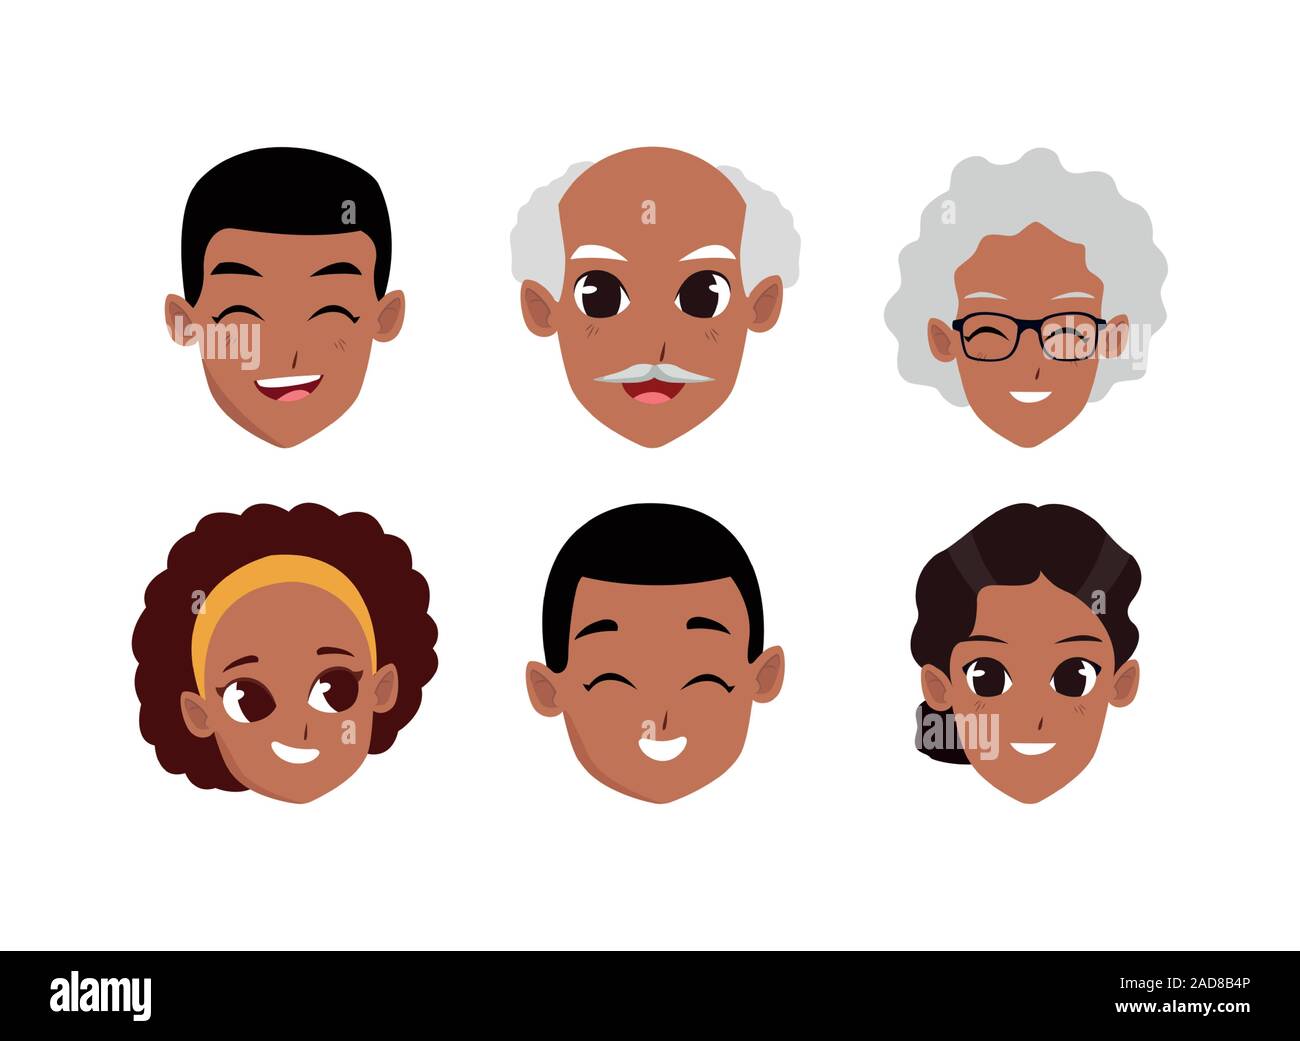 cartoon faces of people